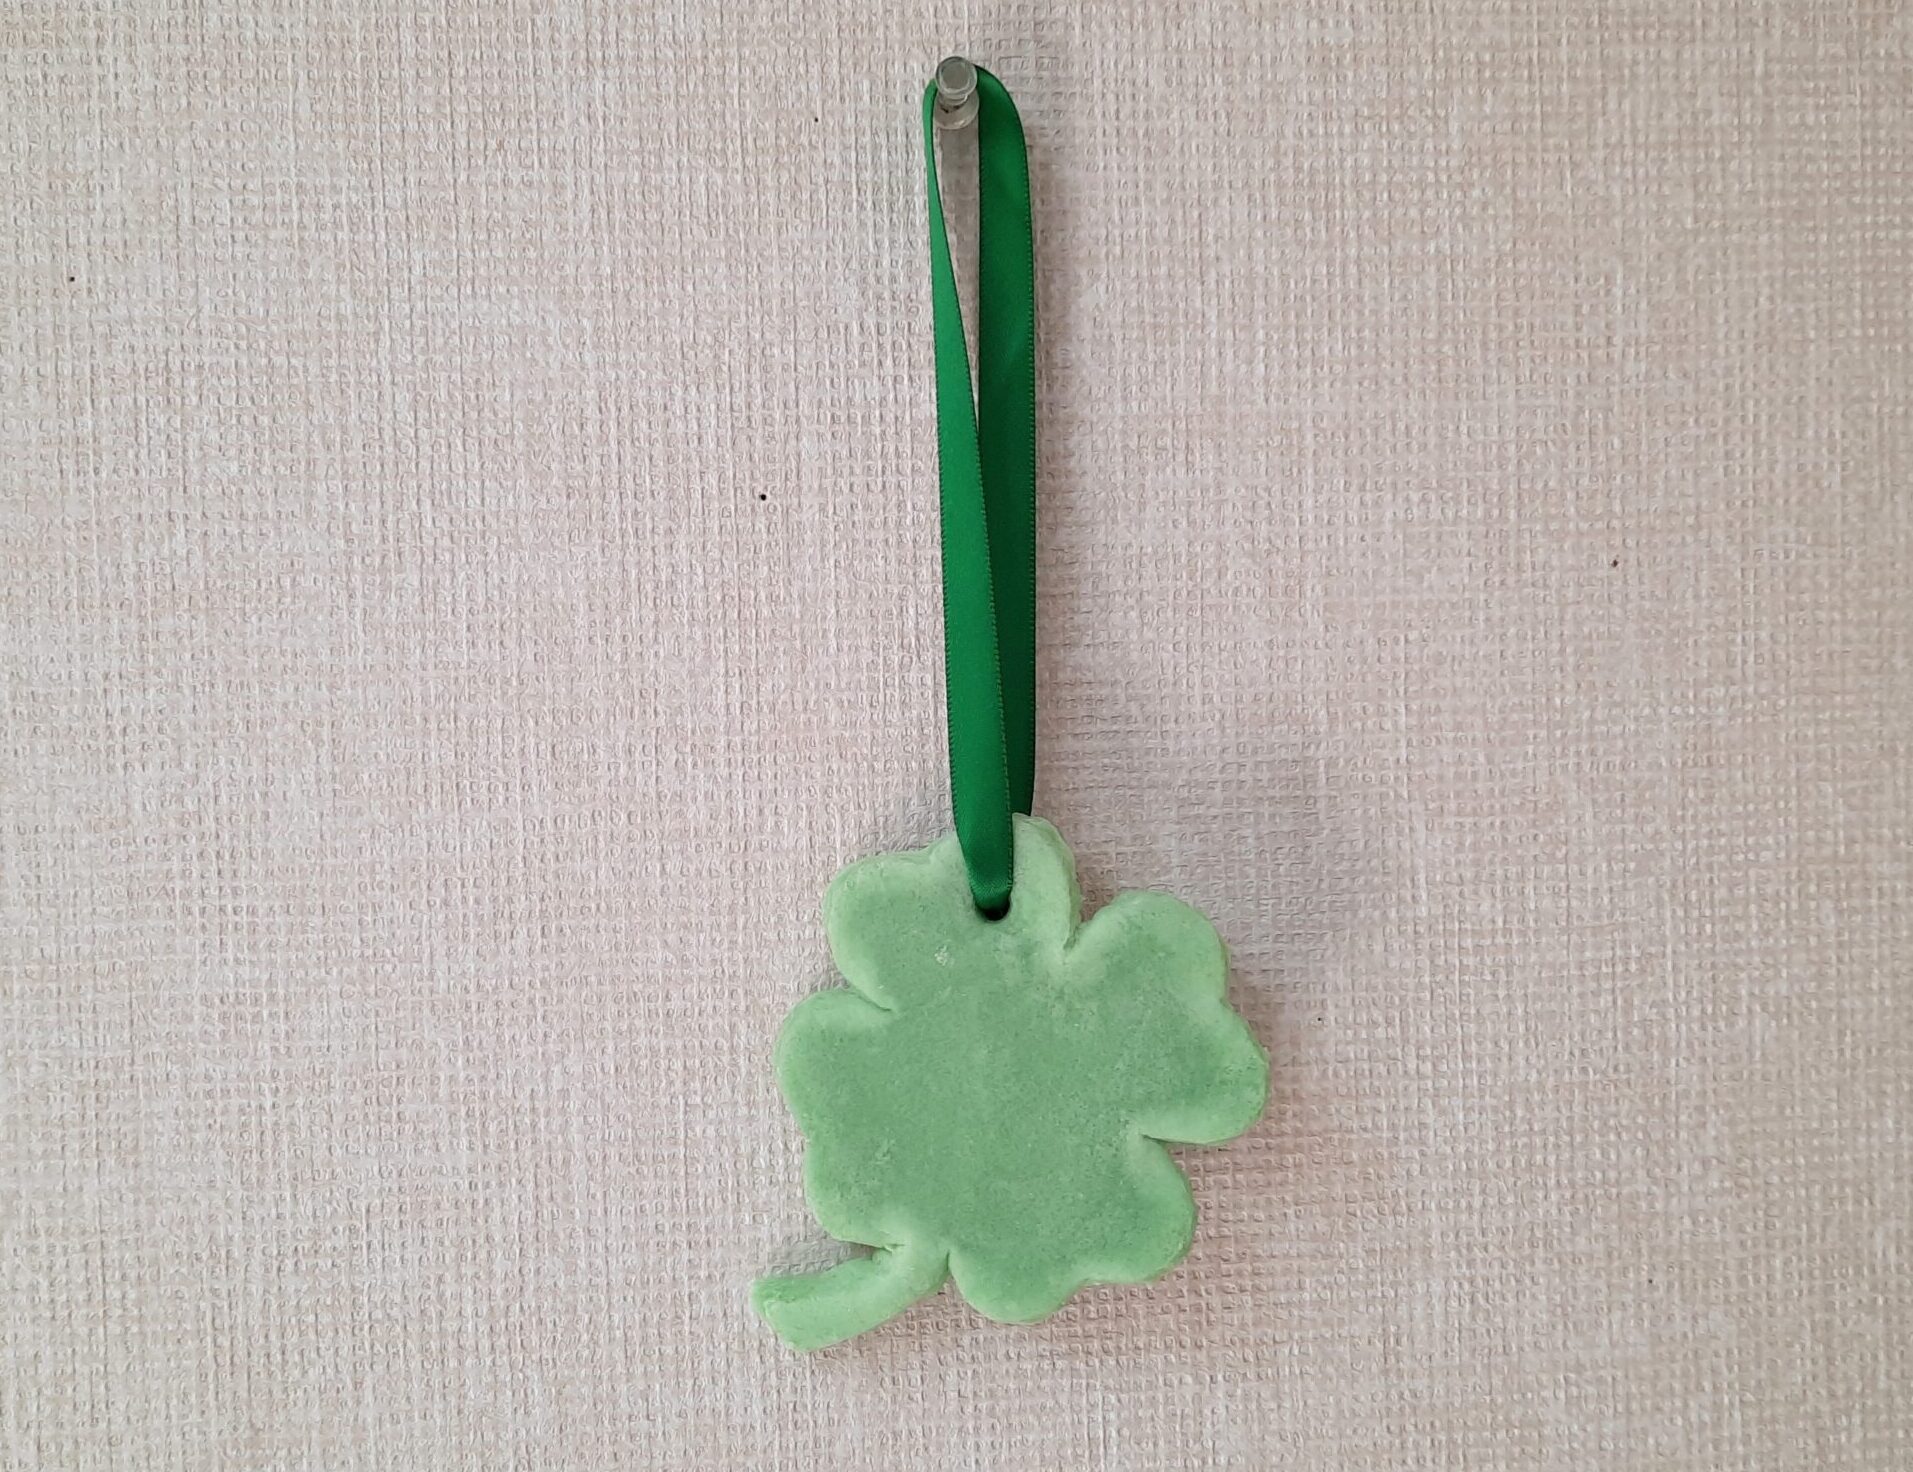 Create A Beautiful Craft Project for St. Patrick’s Day!